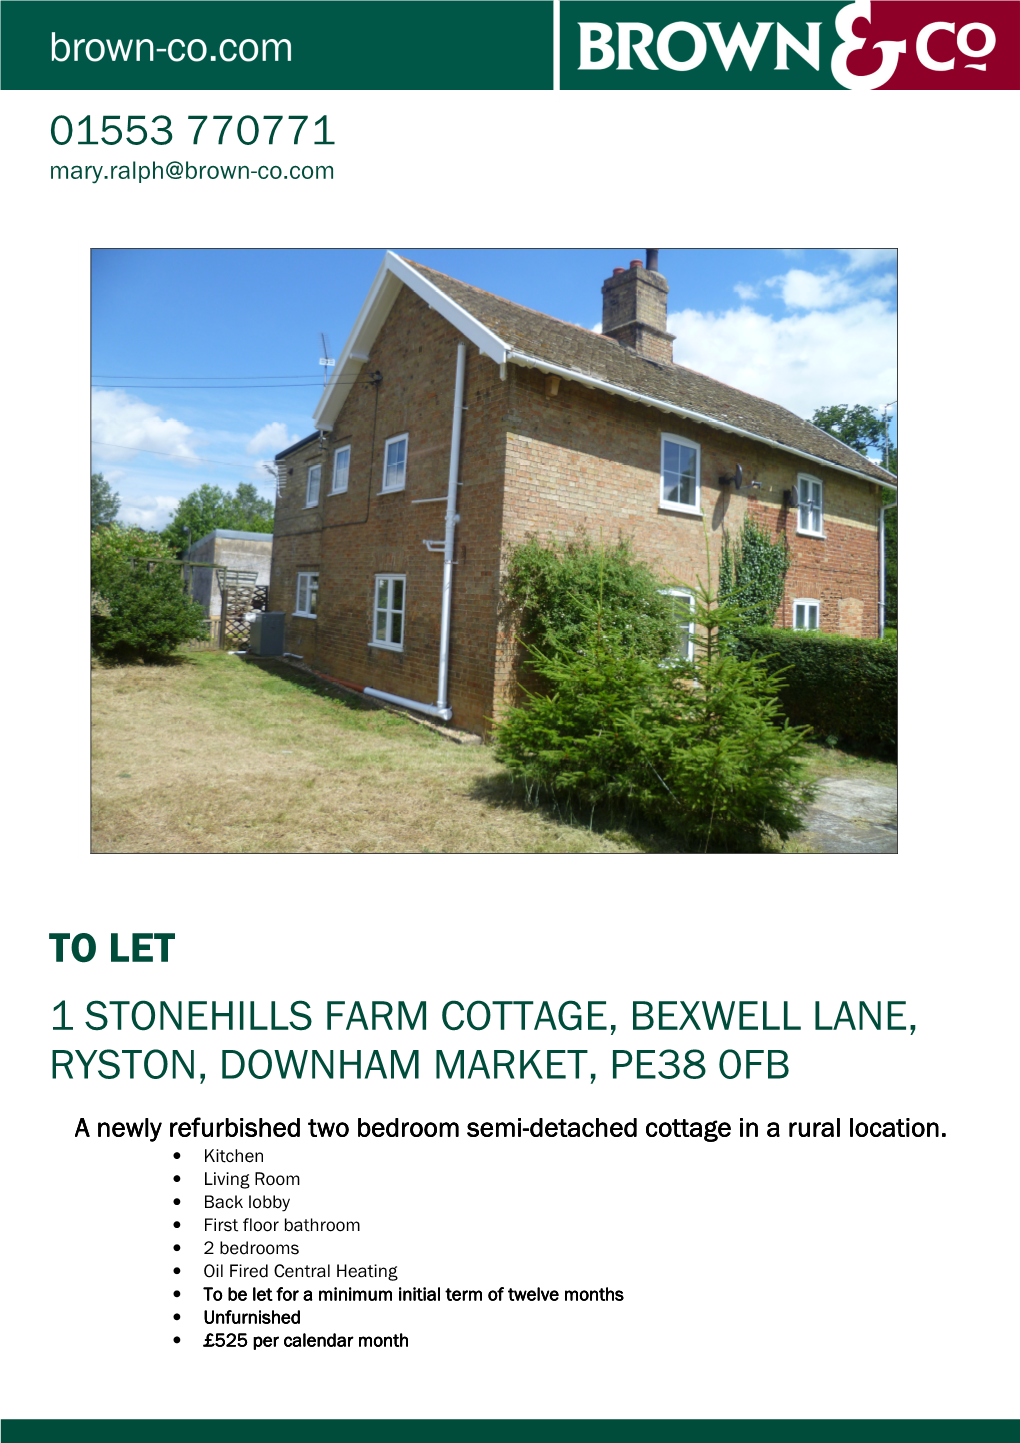 To Let 1 Stonehills Farm Cottage, Bexwell Lane